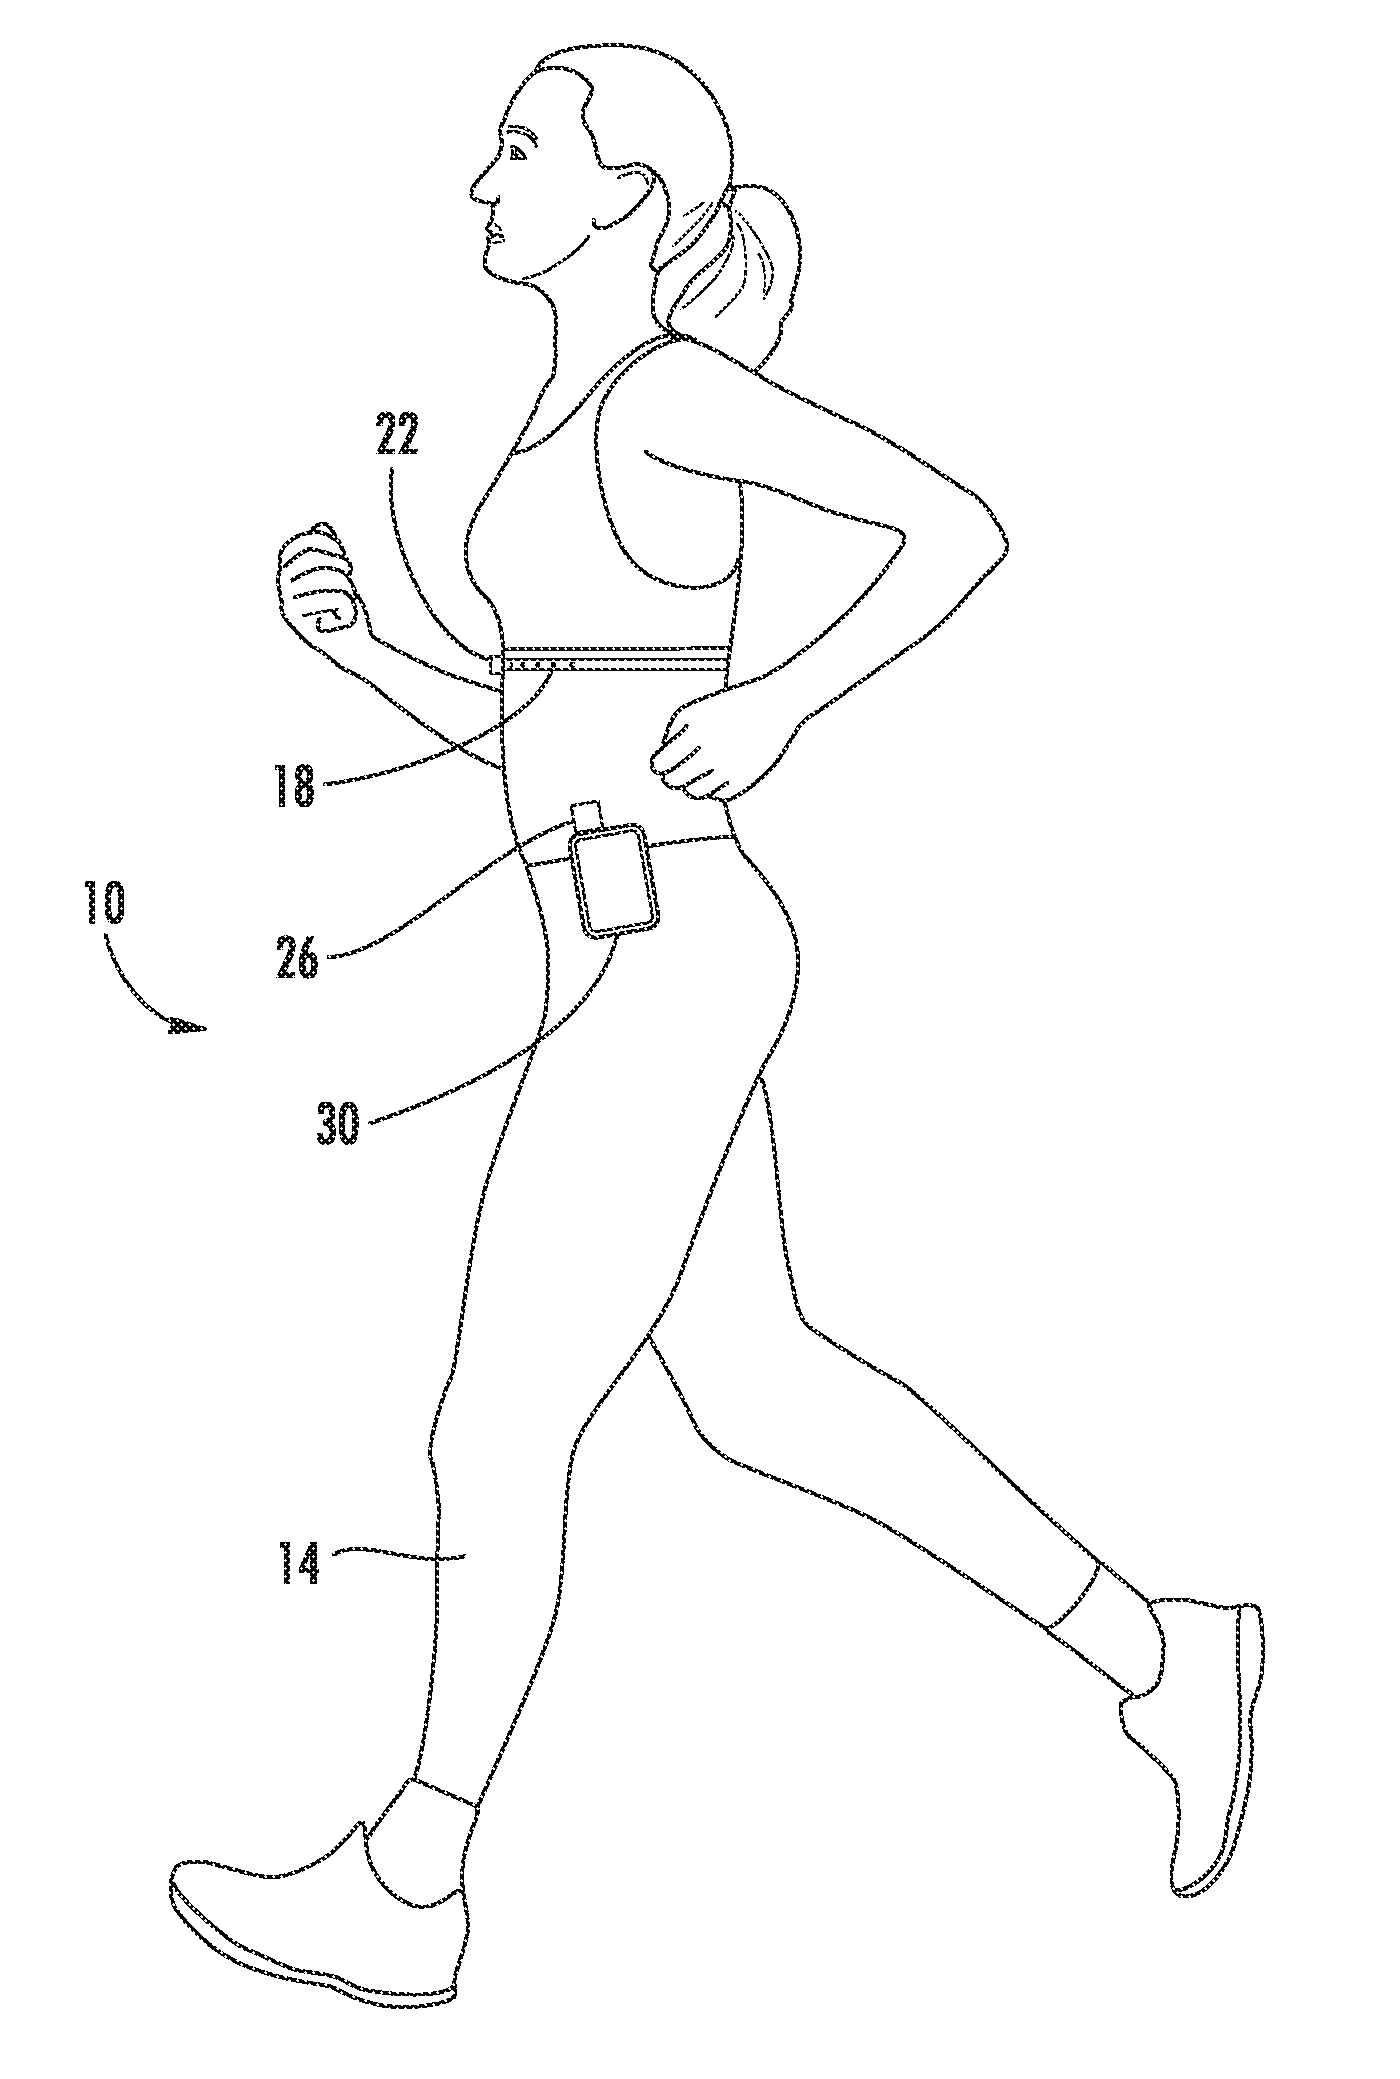 Heart rate monitor device and system